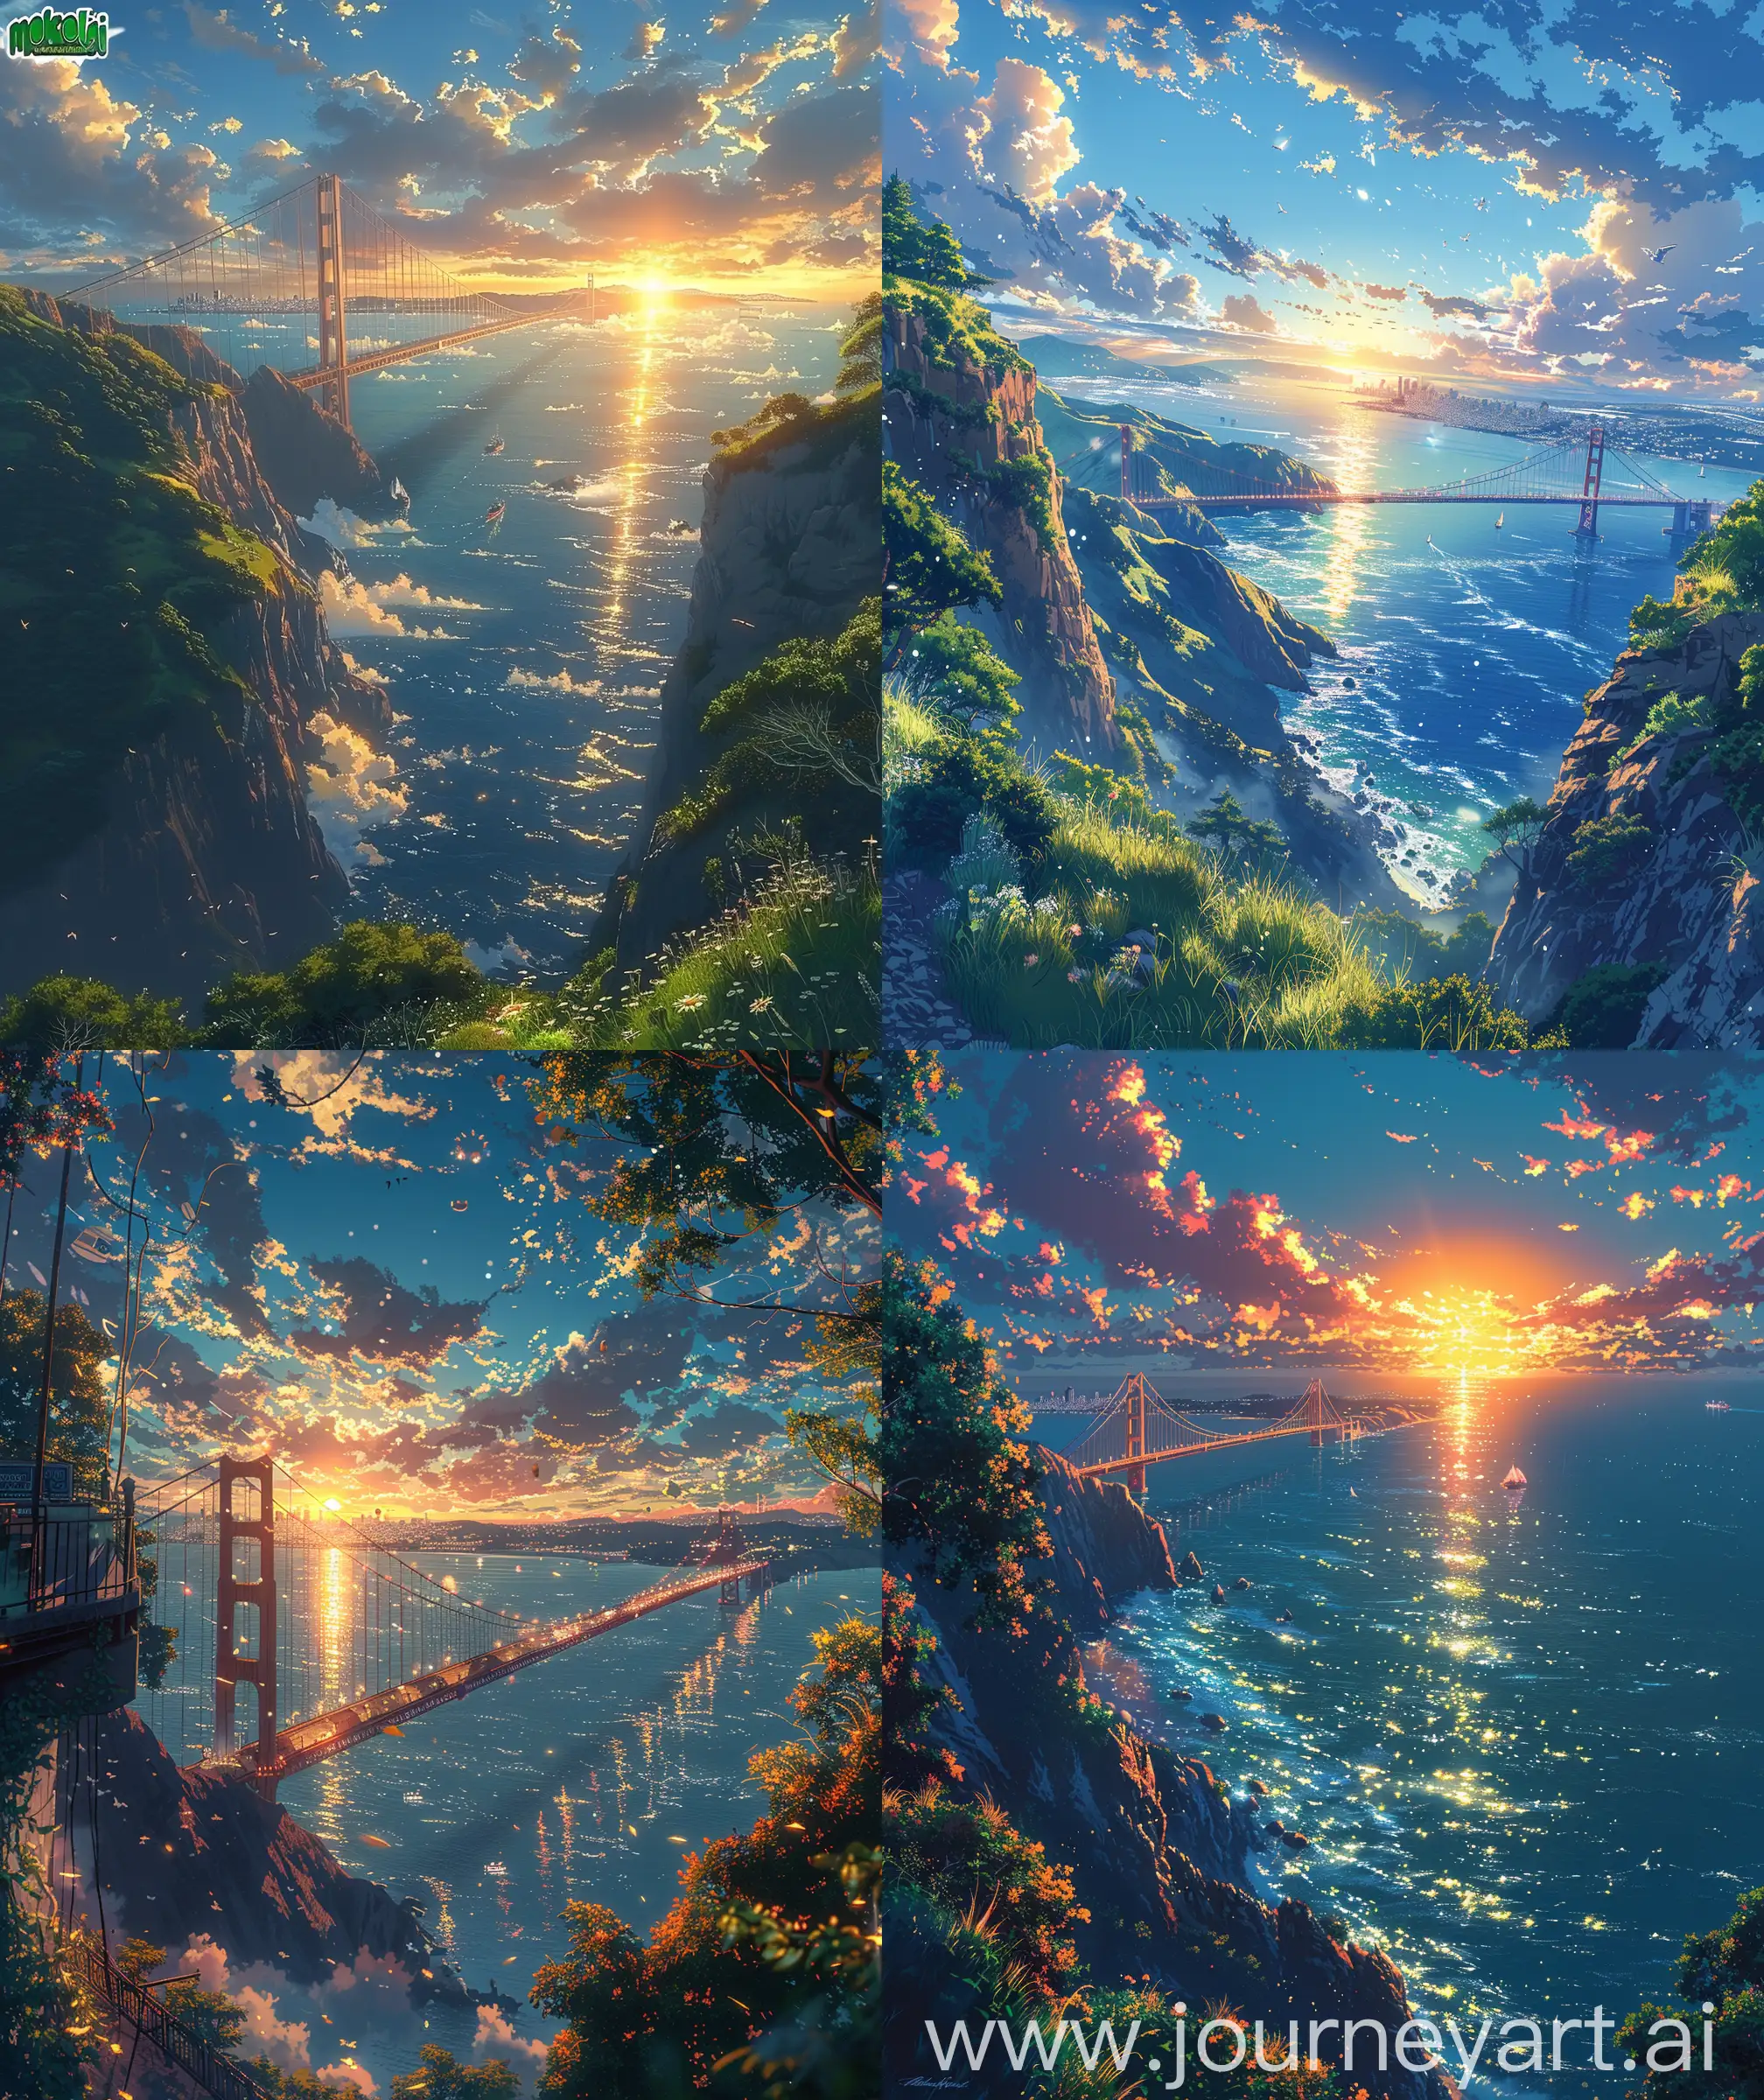 Golden-Gate-Bridge-Anime-Morning-Scenery-with-Sunlight-and-Ship